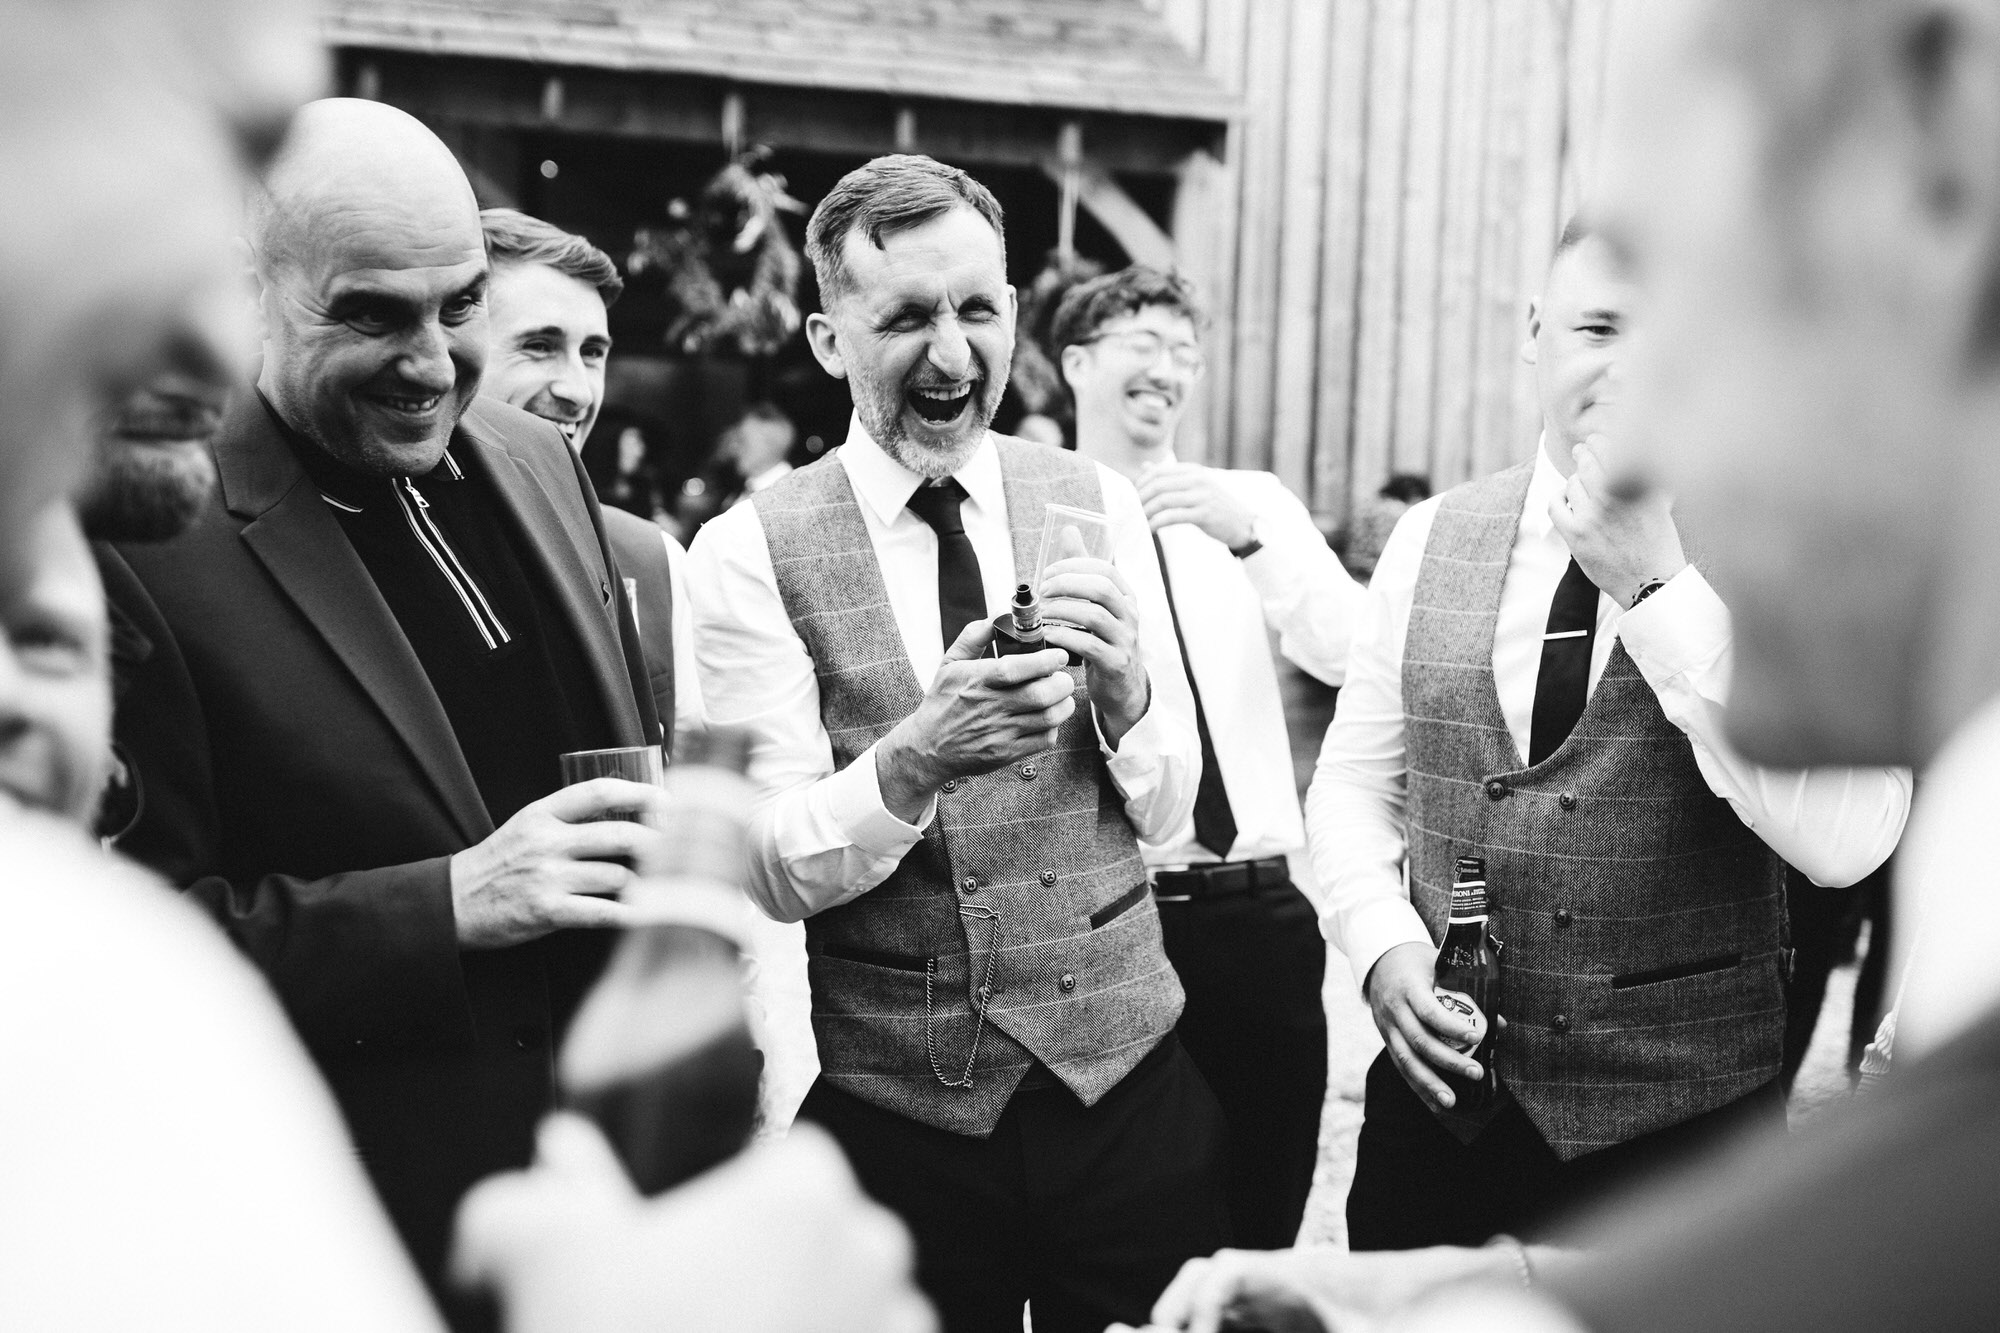 candid shot of wedding guest laughing